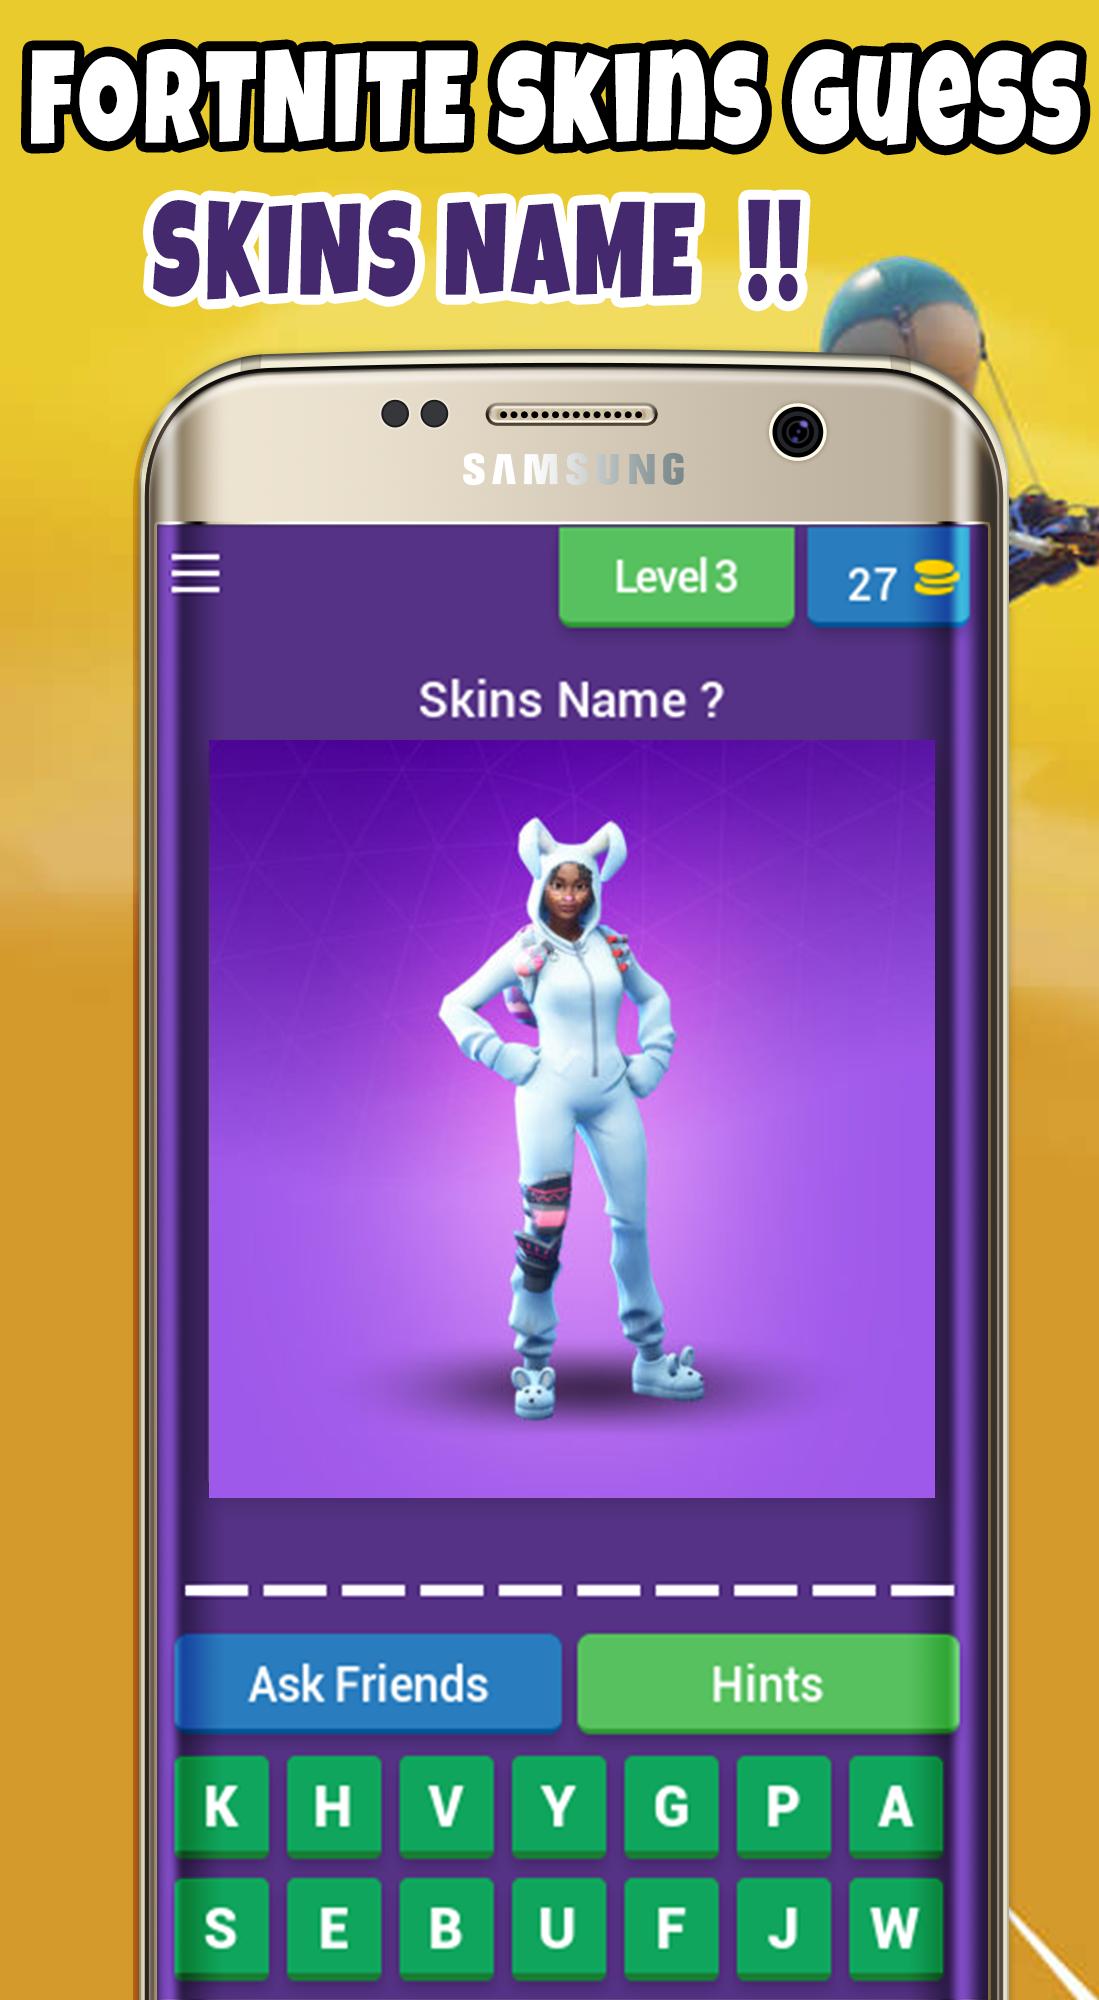 Guess The Fortnite Skins Quiz for Android - APK Download